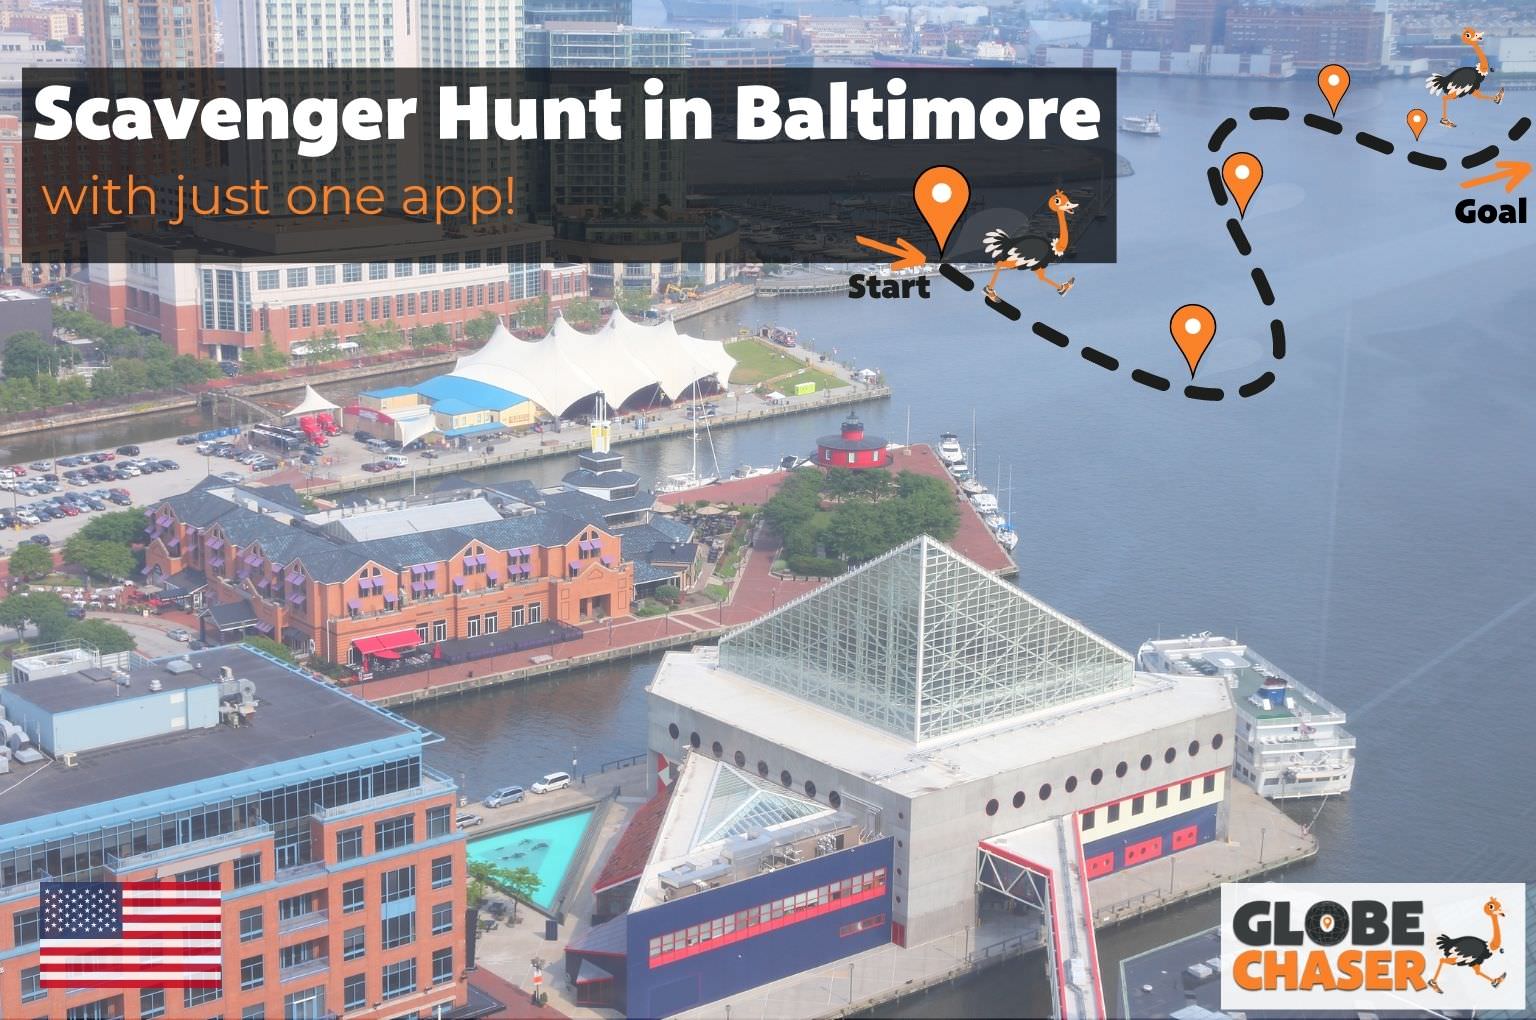 Scavenger Hunt in Baltimore, USA - Family Activities with the Globe Chaser App for Outdoor Fun